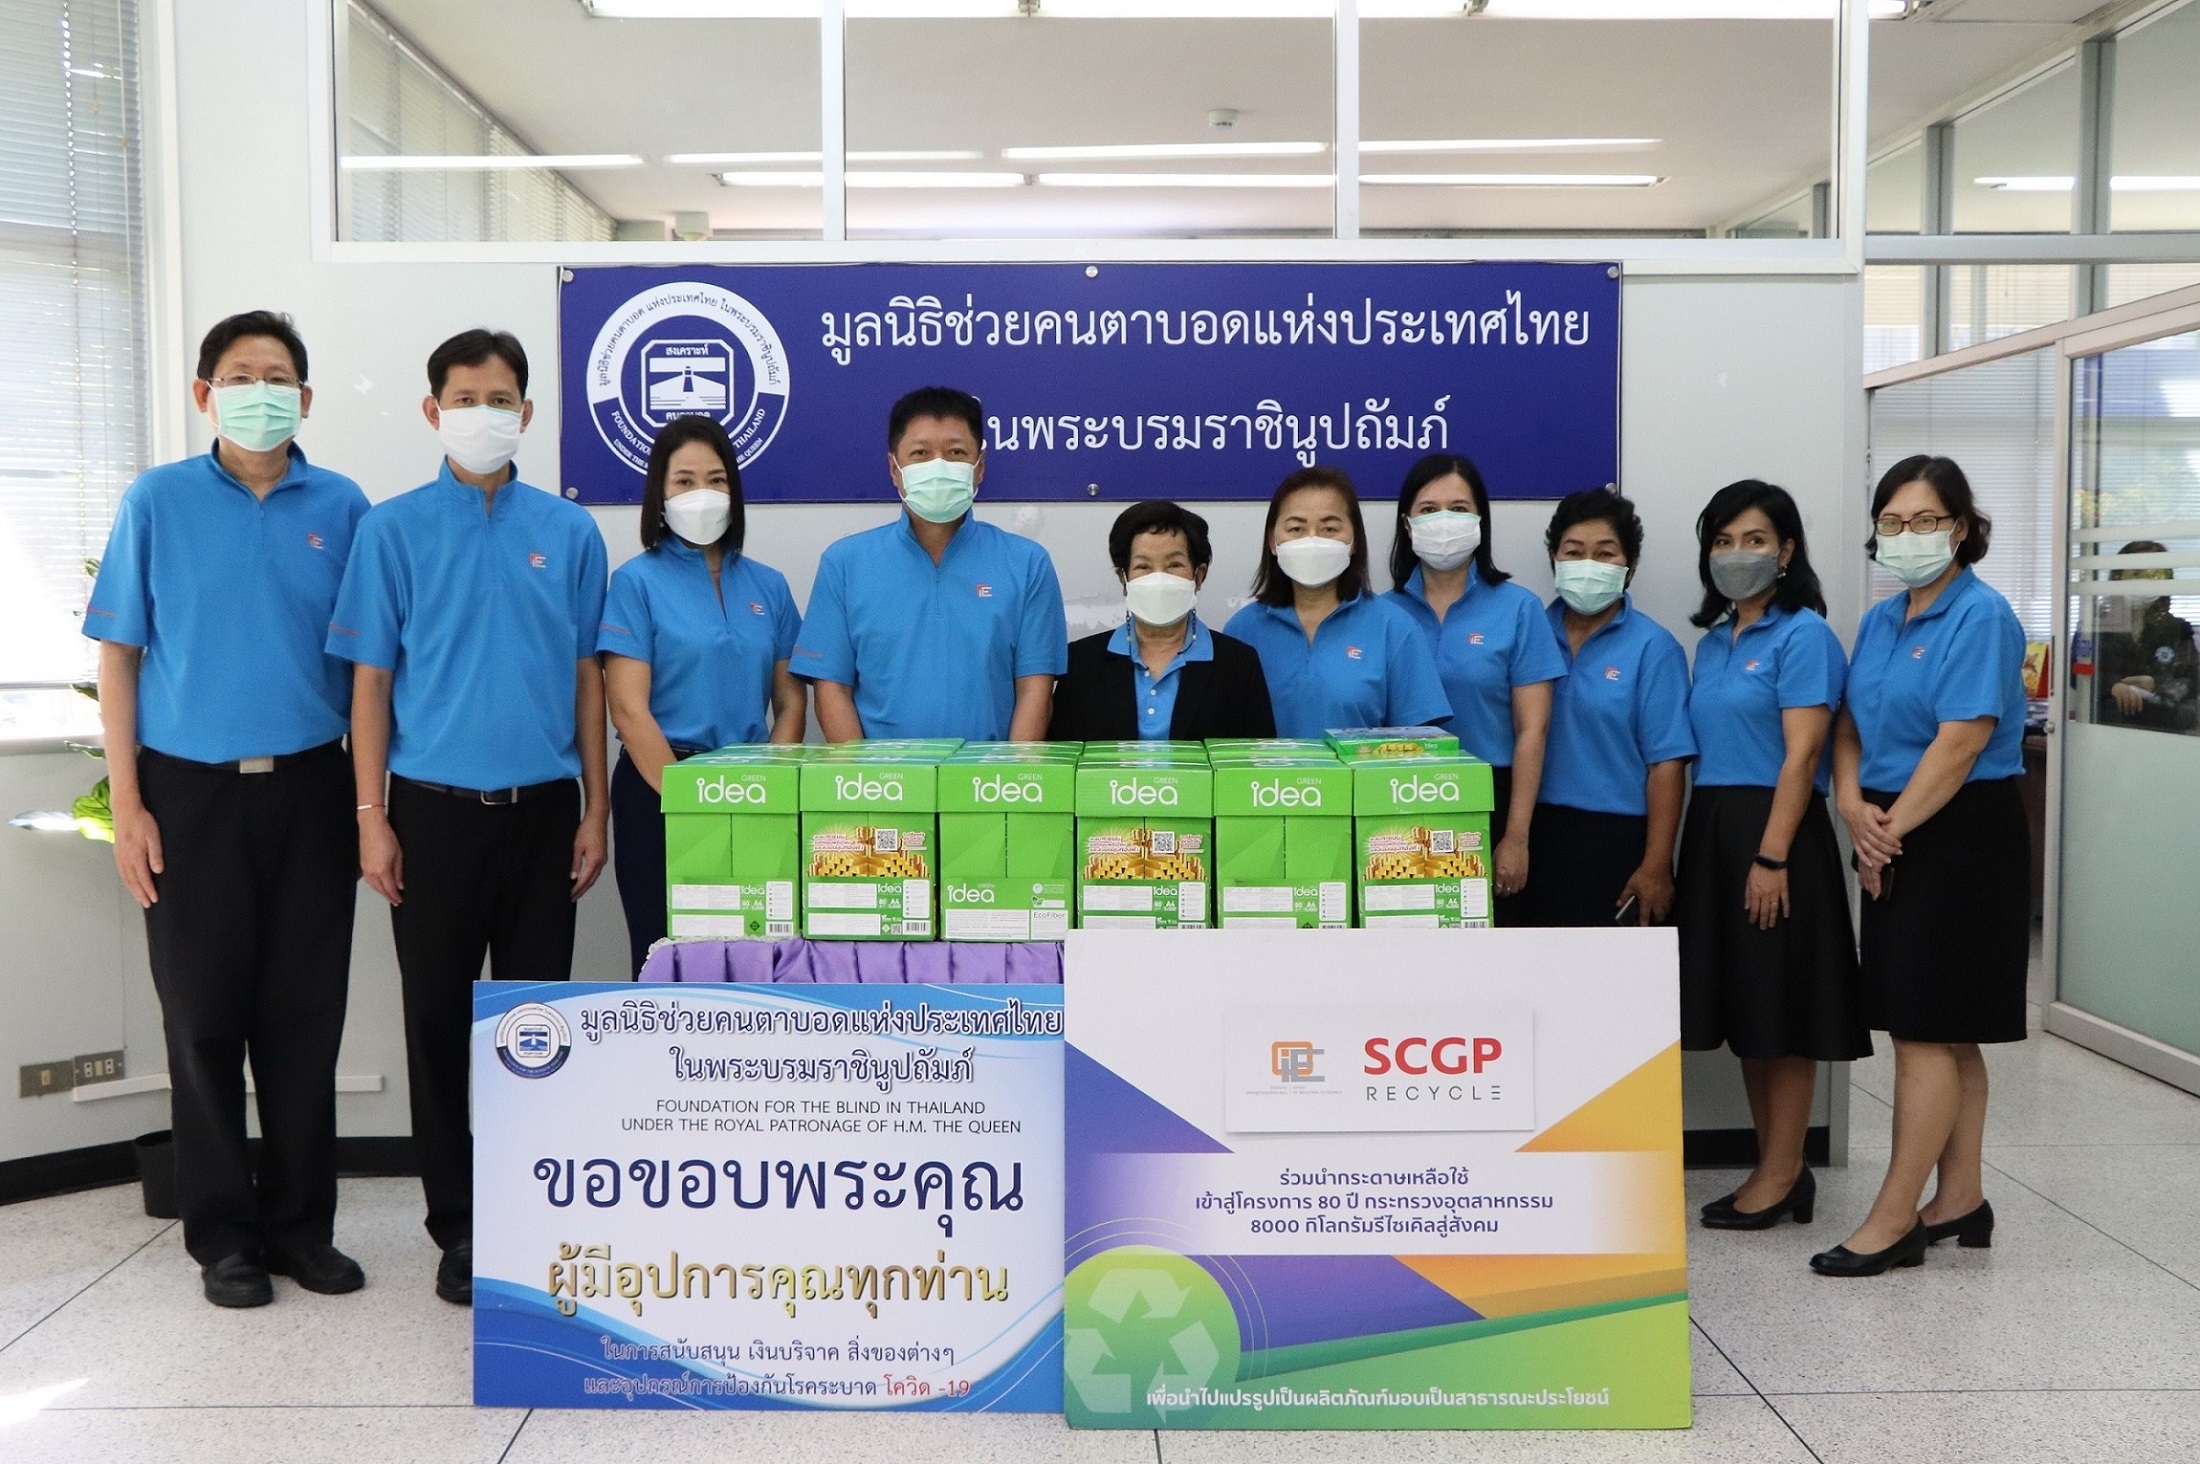 OIE donates A4 paper to the Foundation for the Blind in Thailand under the Royal Patronage of H.M. the Queen's volunteer